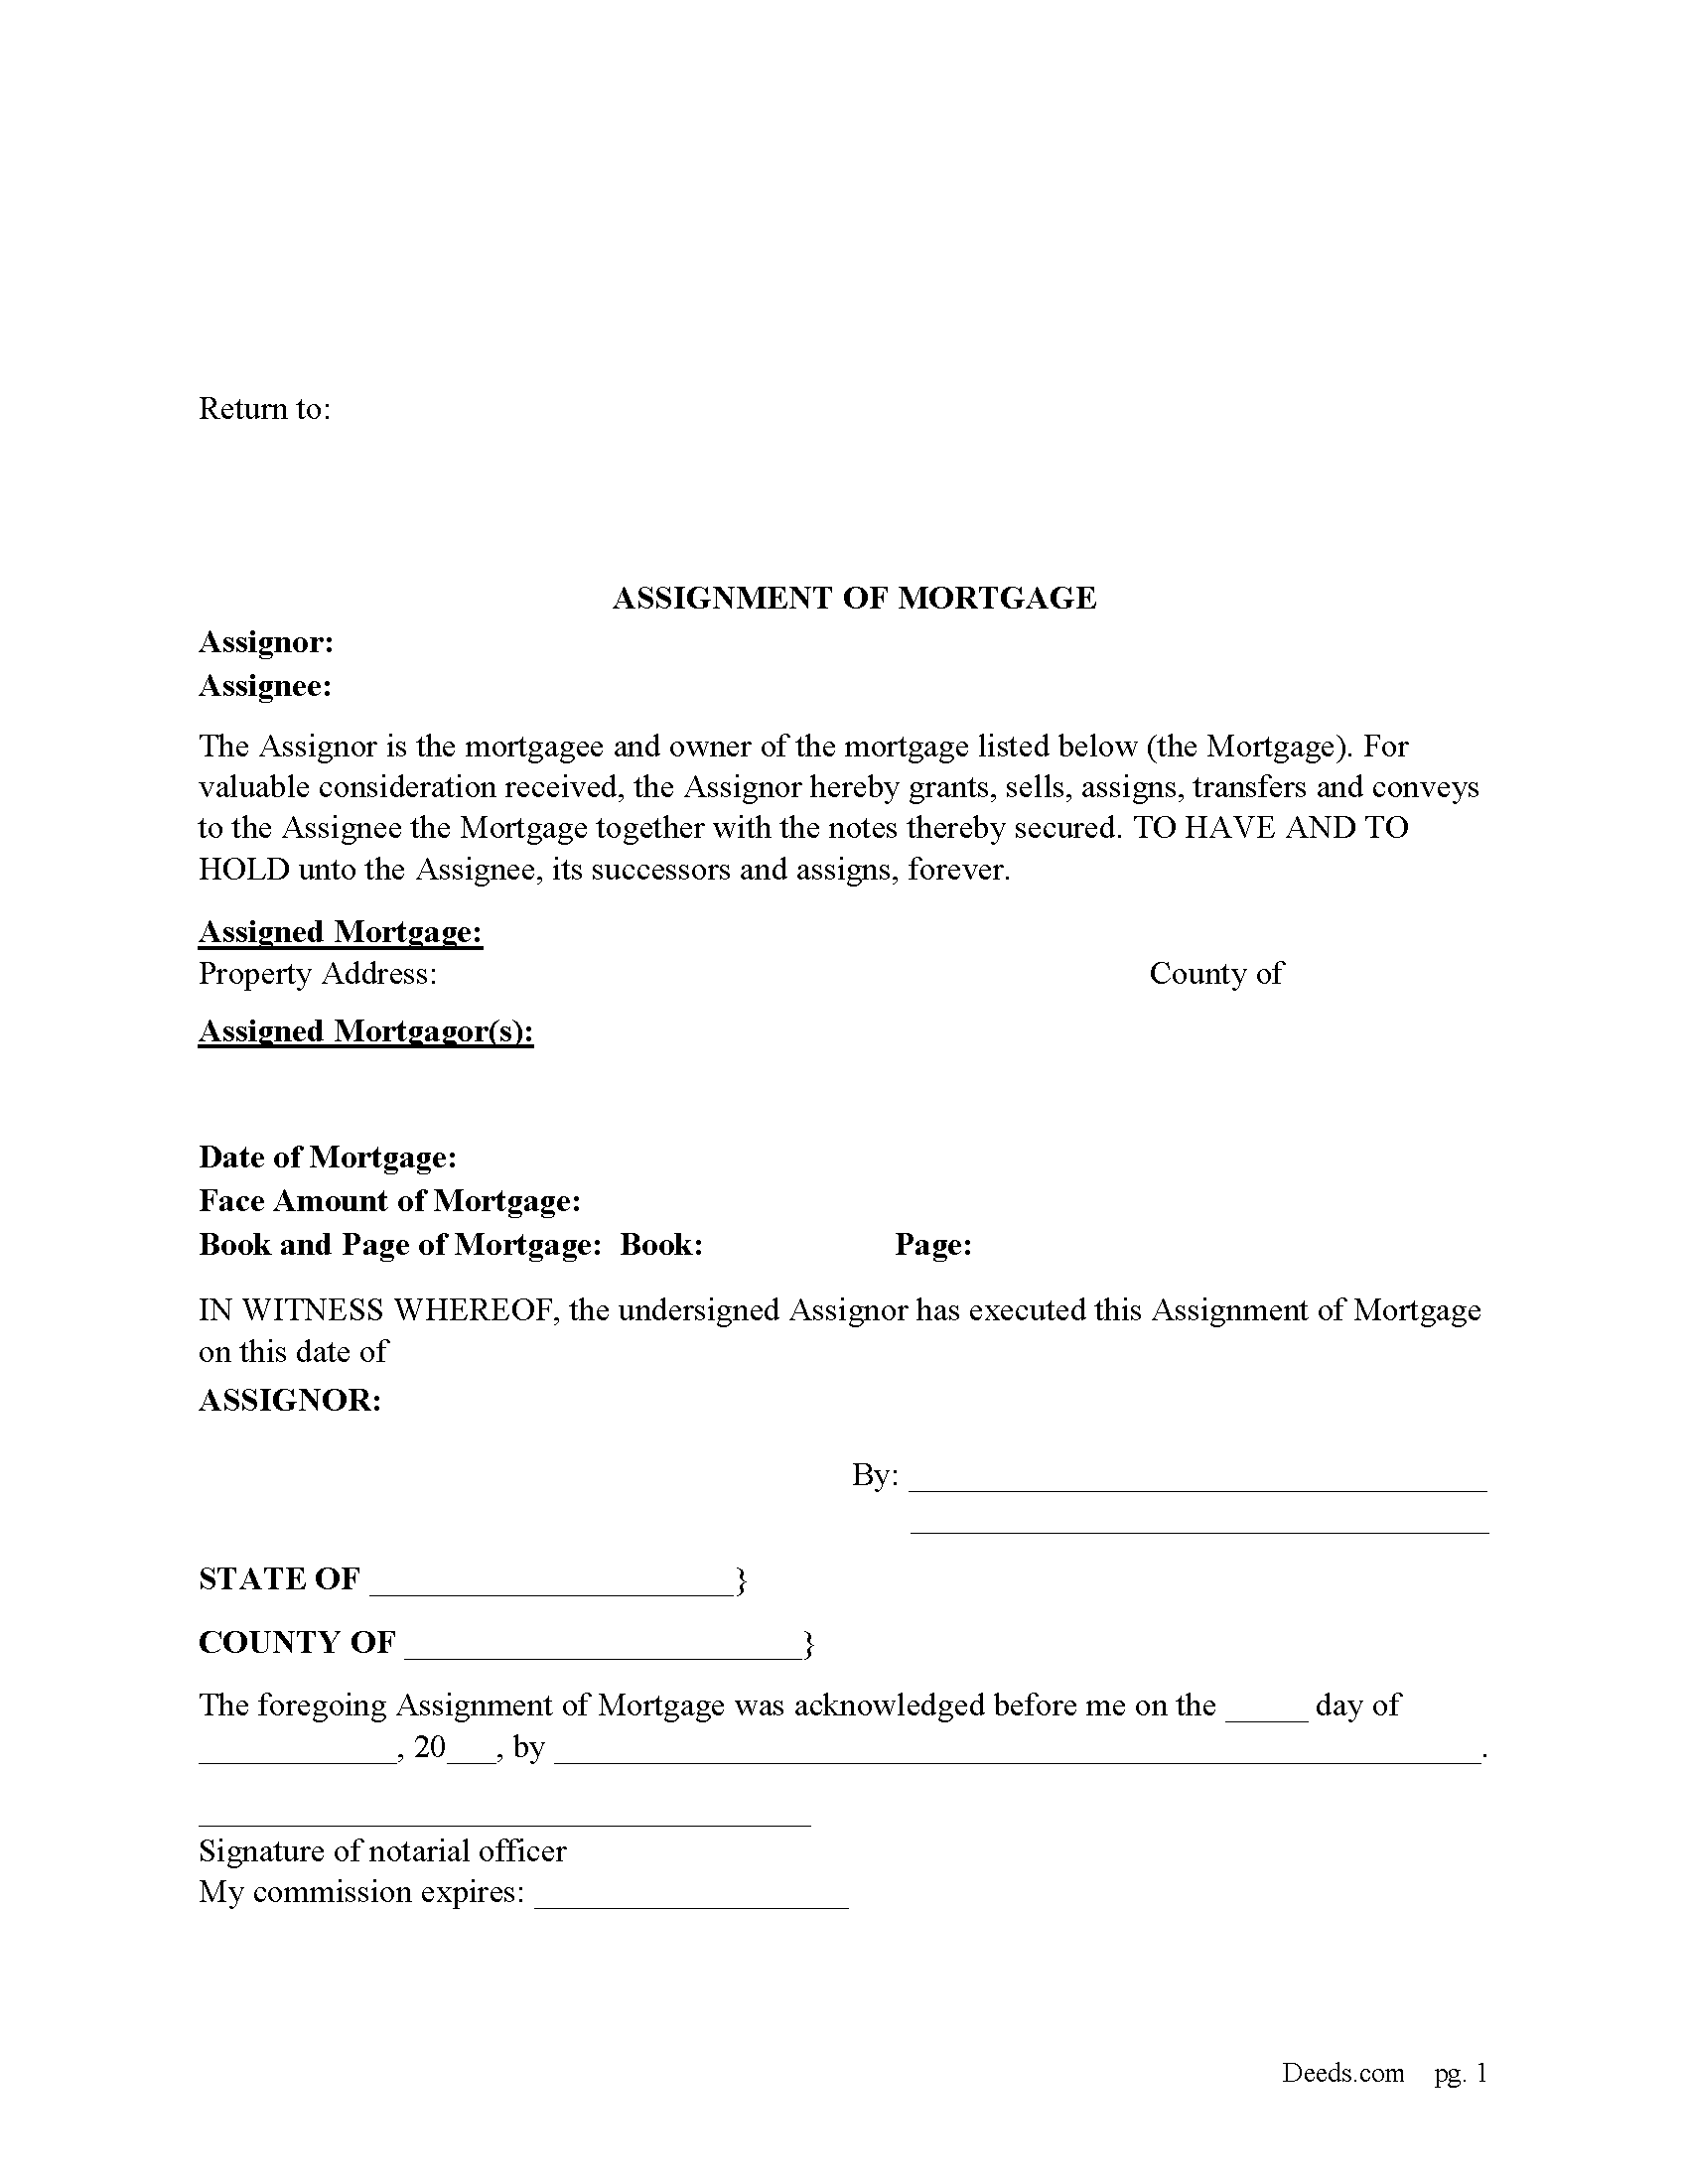 Assignment of Mortgage Form